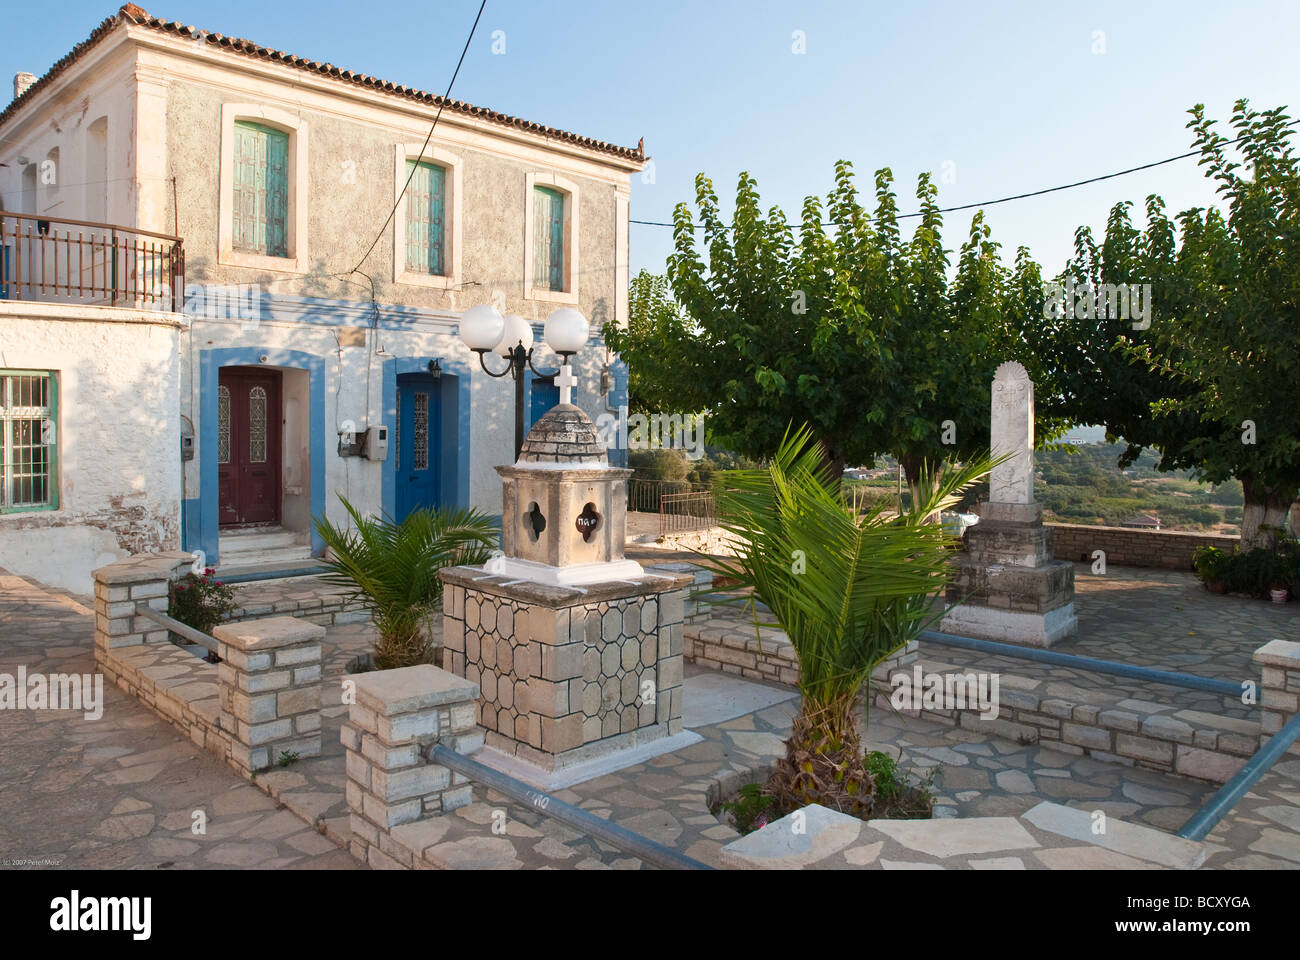 Old stone house in a small square in a village on a greek island Stock Photo